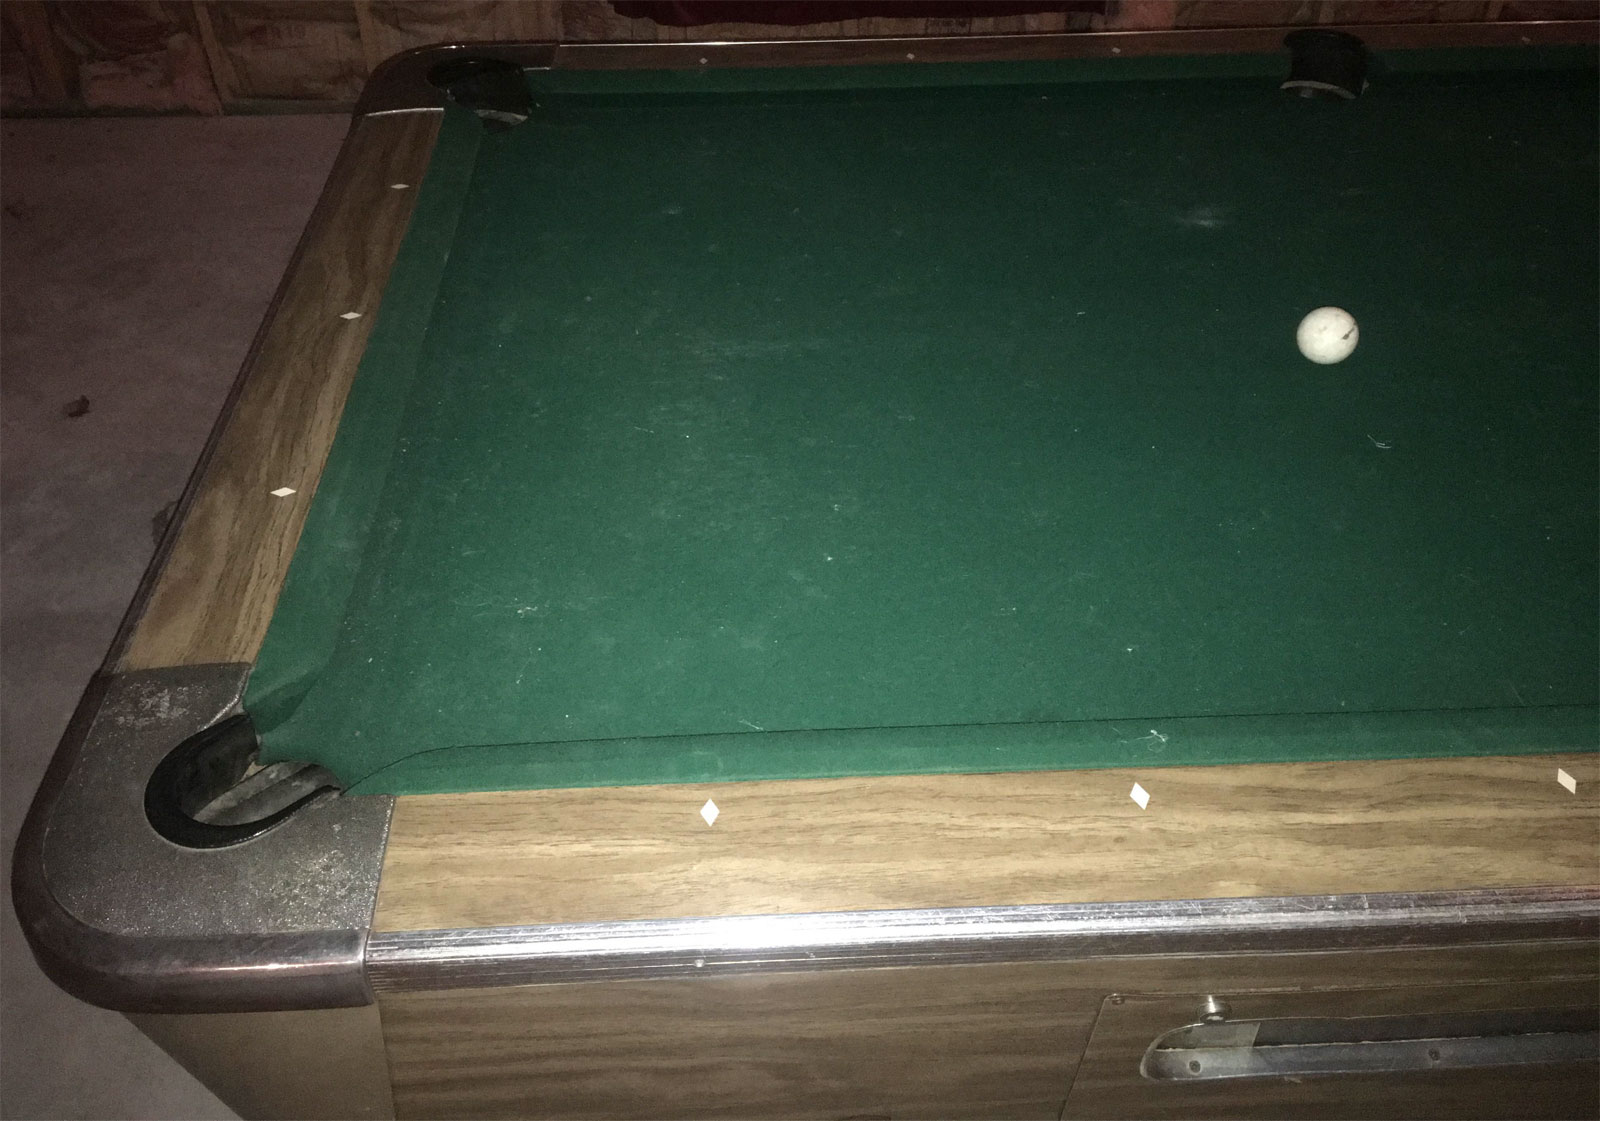 valley pool table serial number location